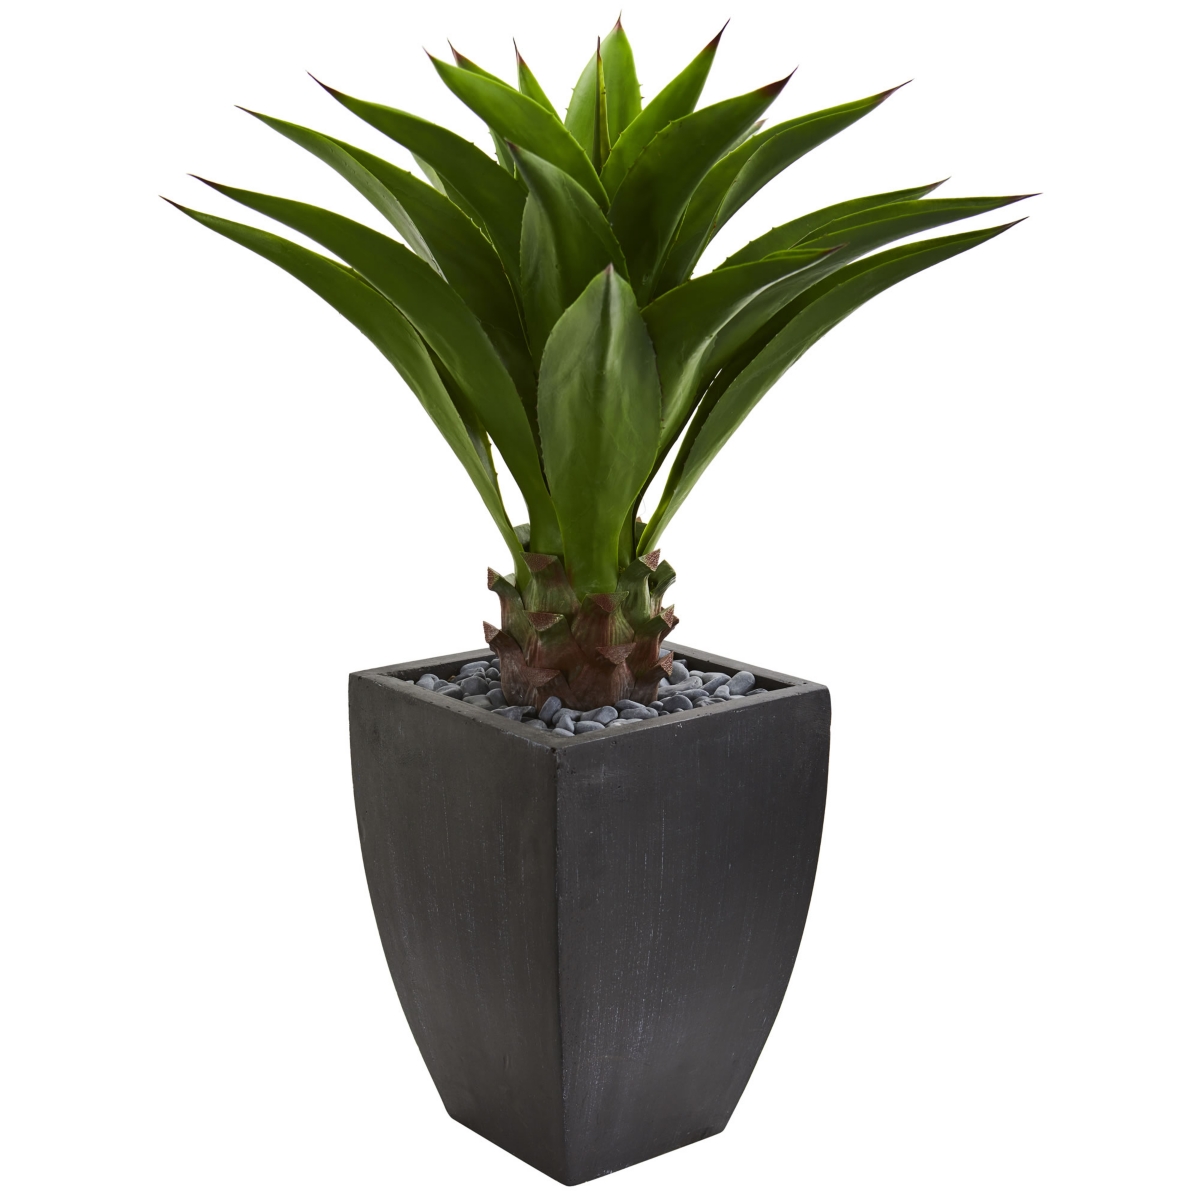 Agave Artificial Plant in Black Planter - Green